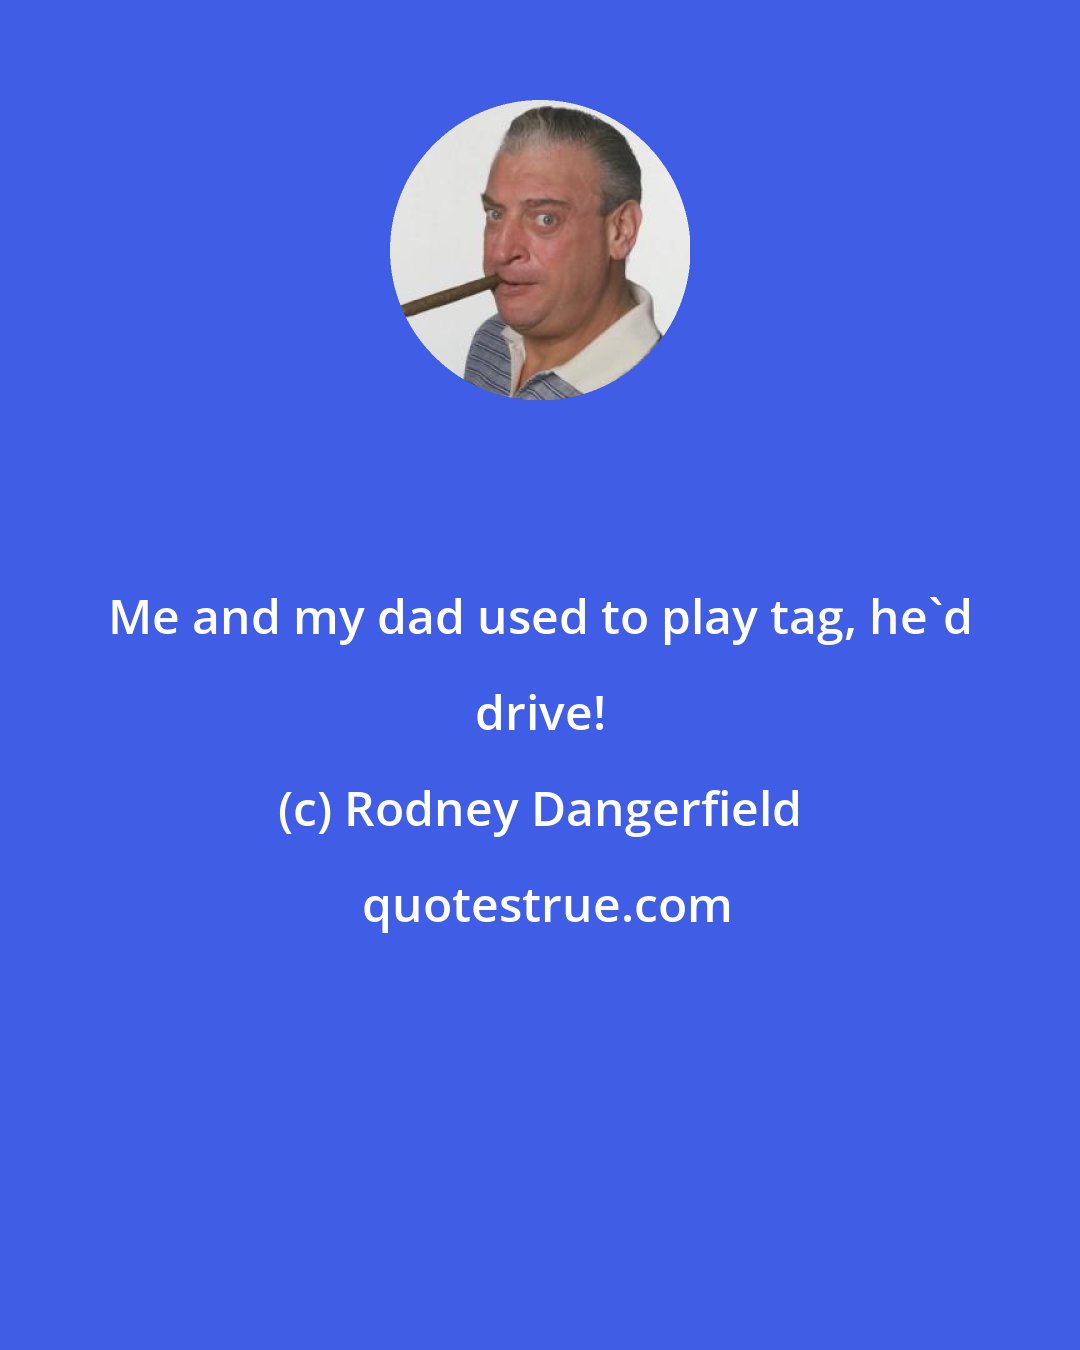 Rodney Dangerfield: Me and my dad used to play tag, he'd drive!